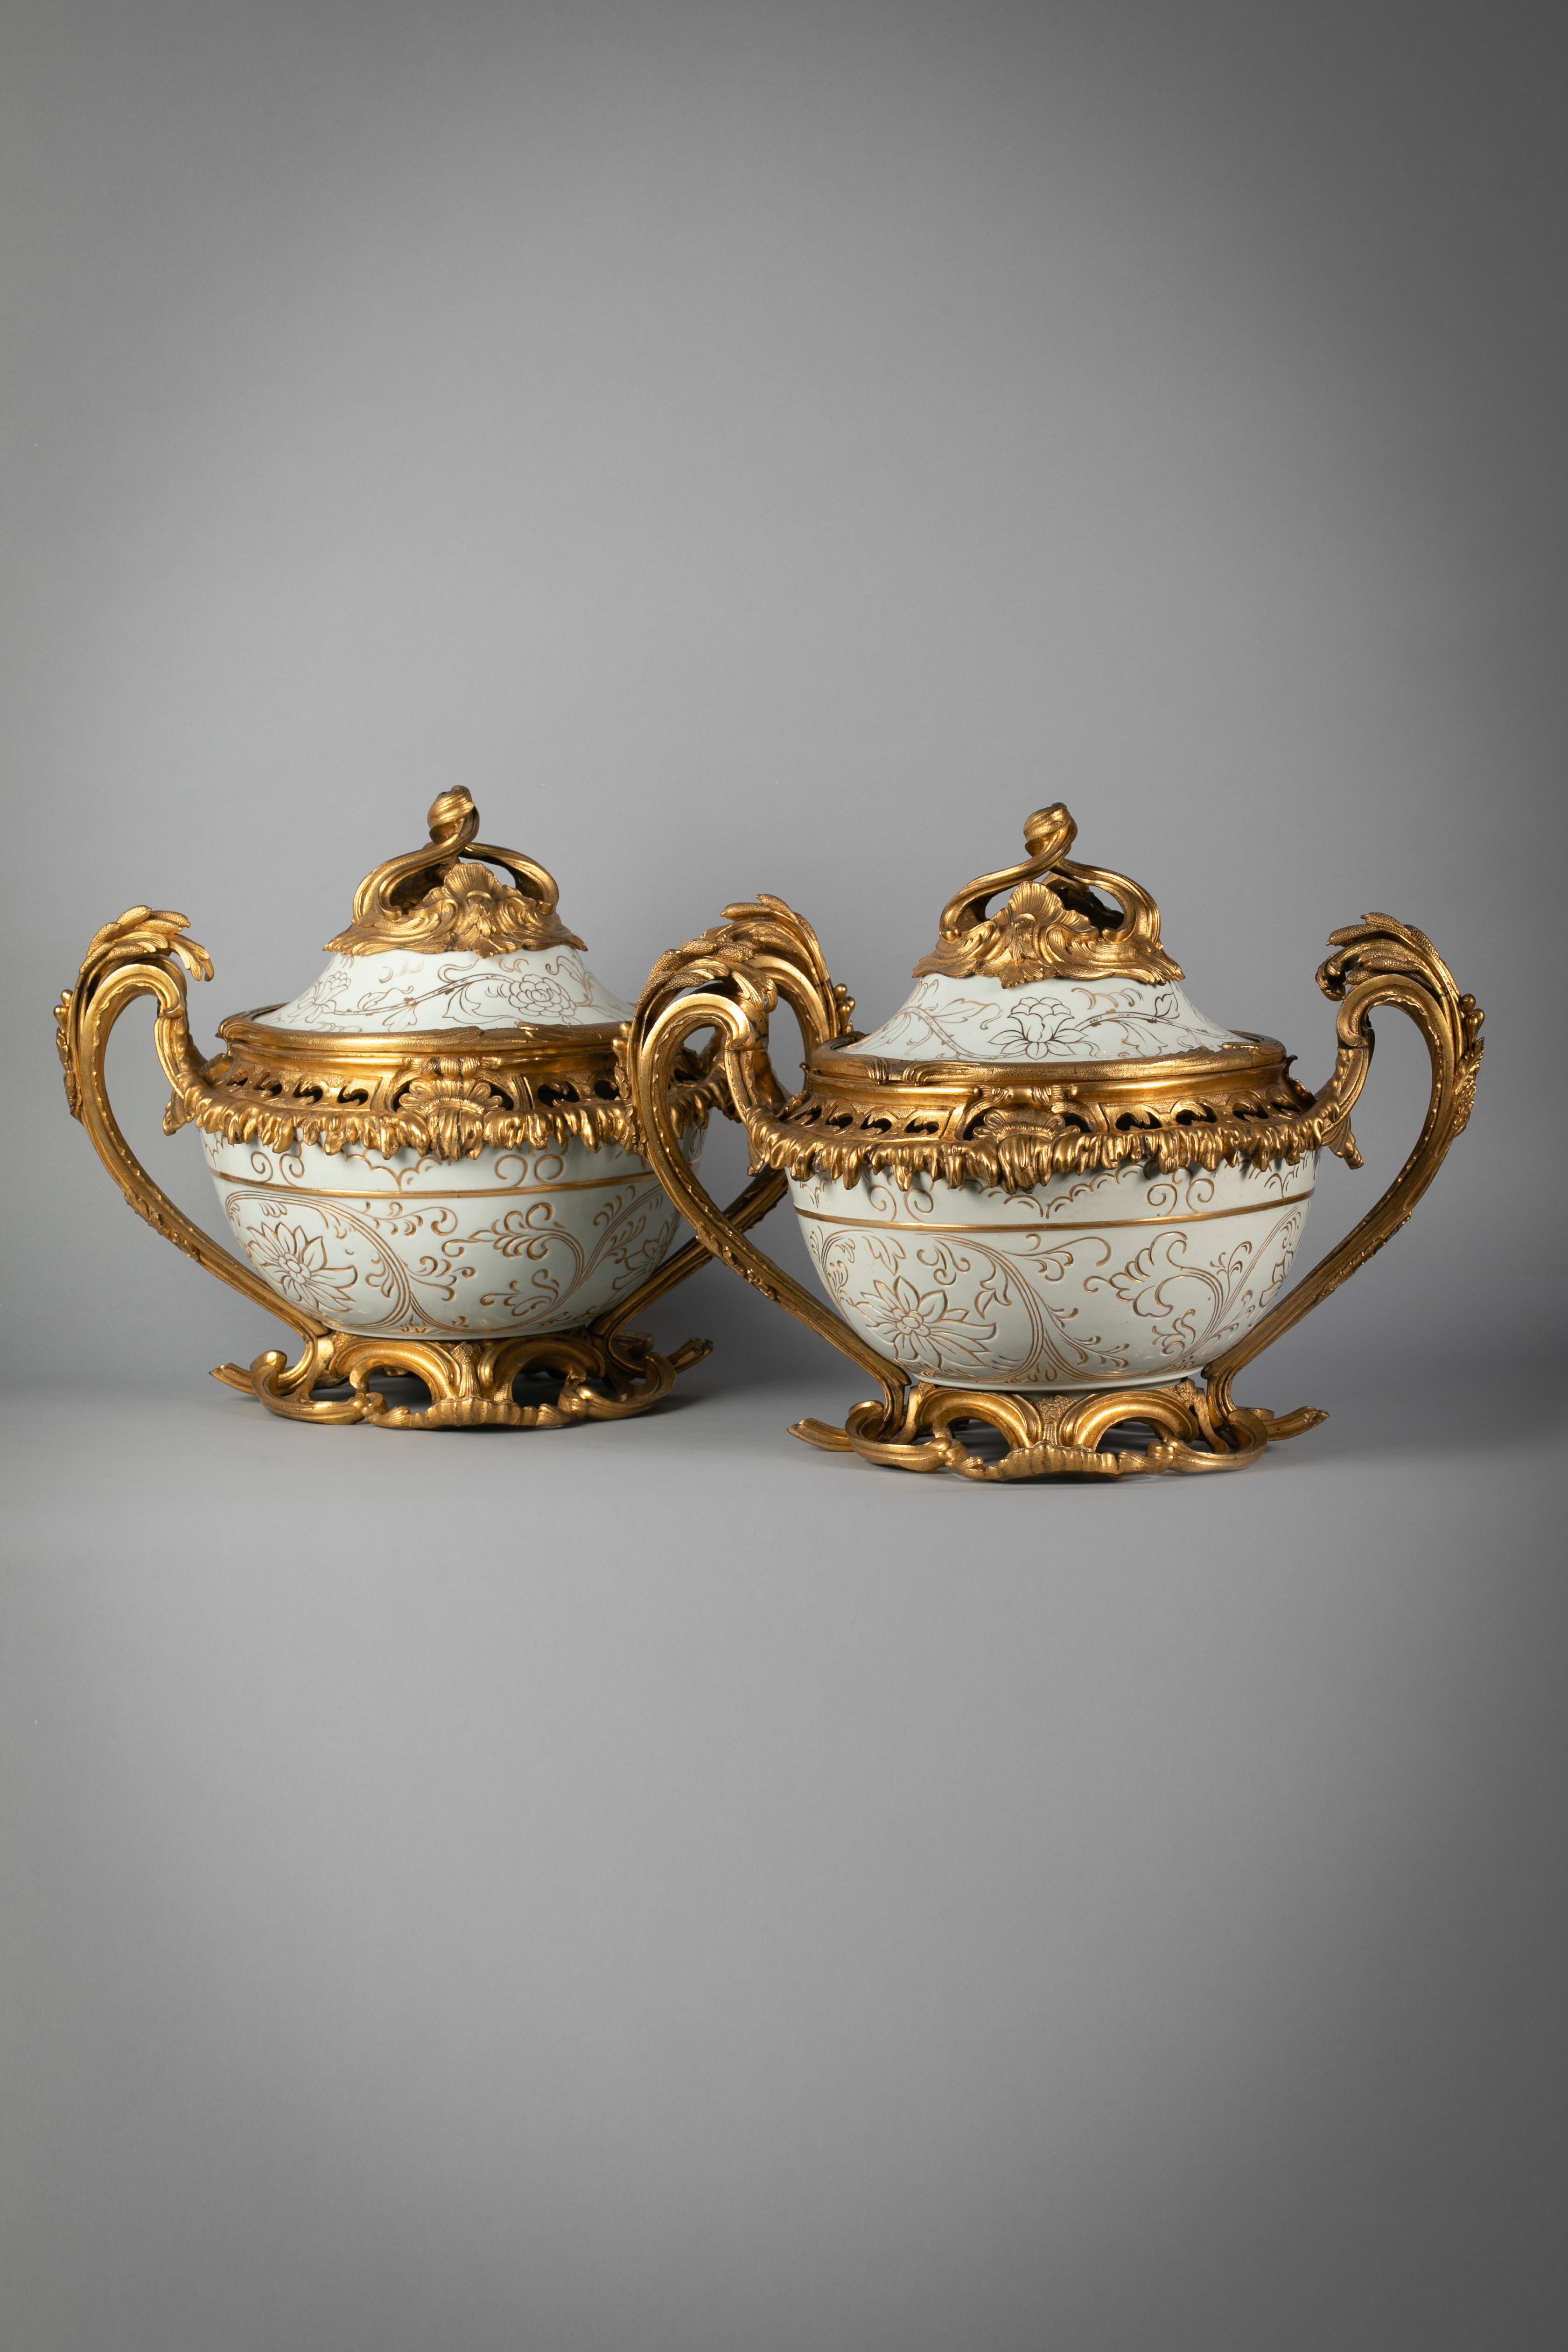 Pair of large bronze-mounted celadon and gilt covered potpourri jars, circa 1870 on French mounts.